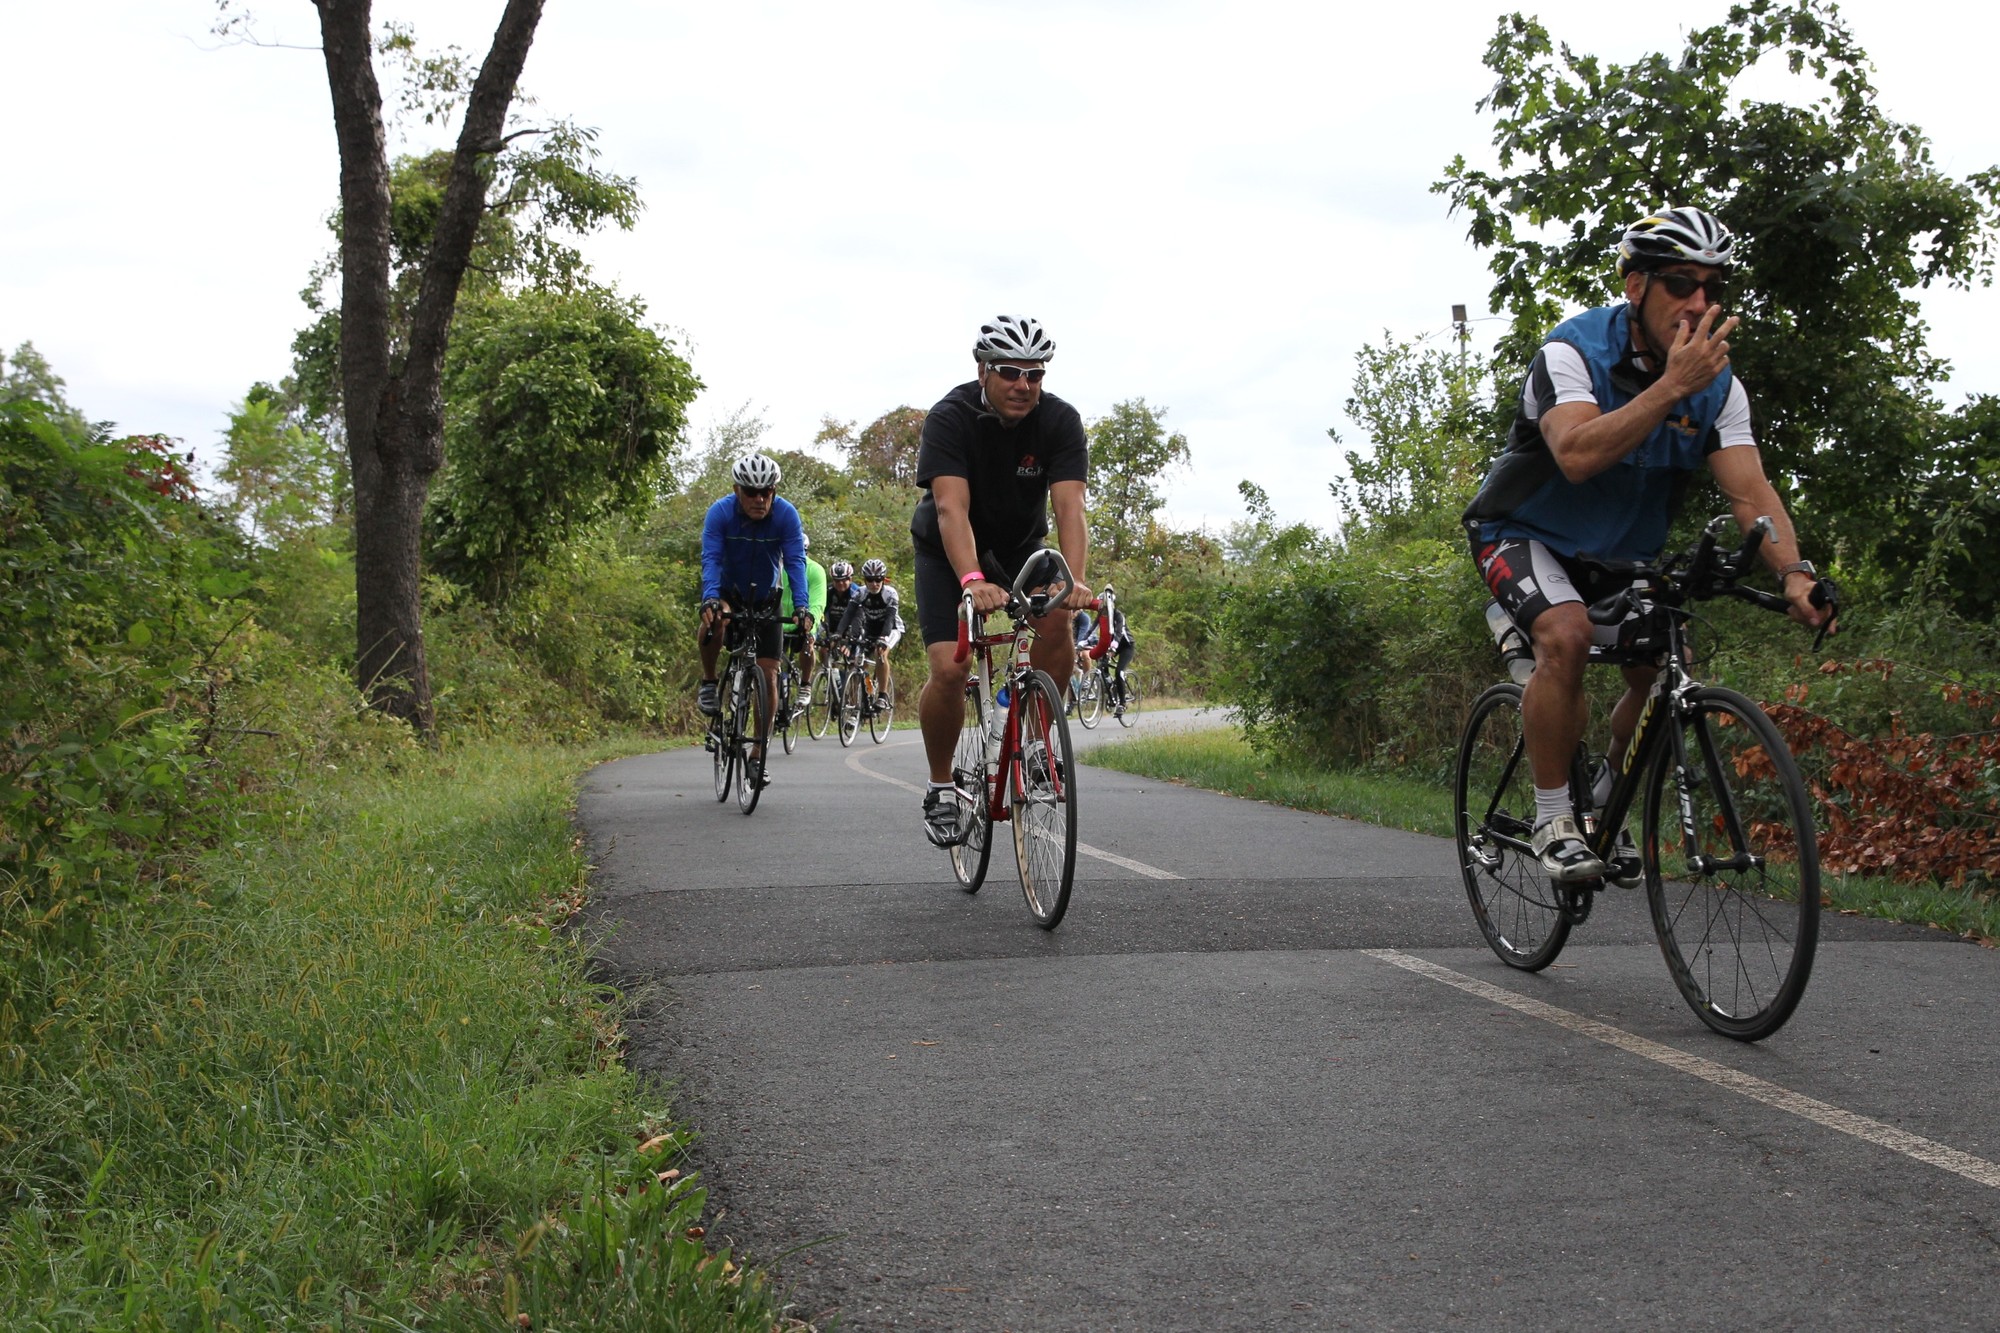 The Bruce Pye Memorial Bike Ride was held on the bike trail along the Wantagh Parkway.